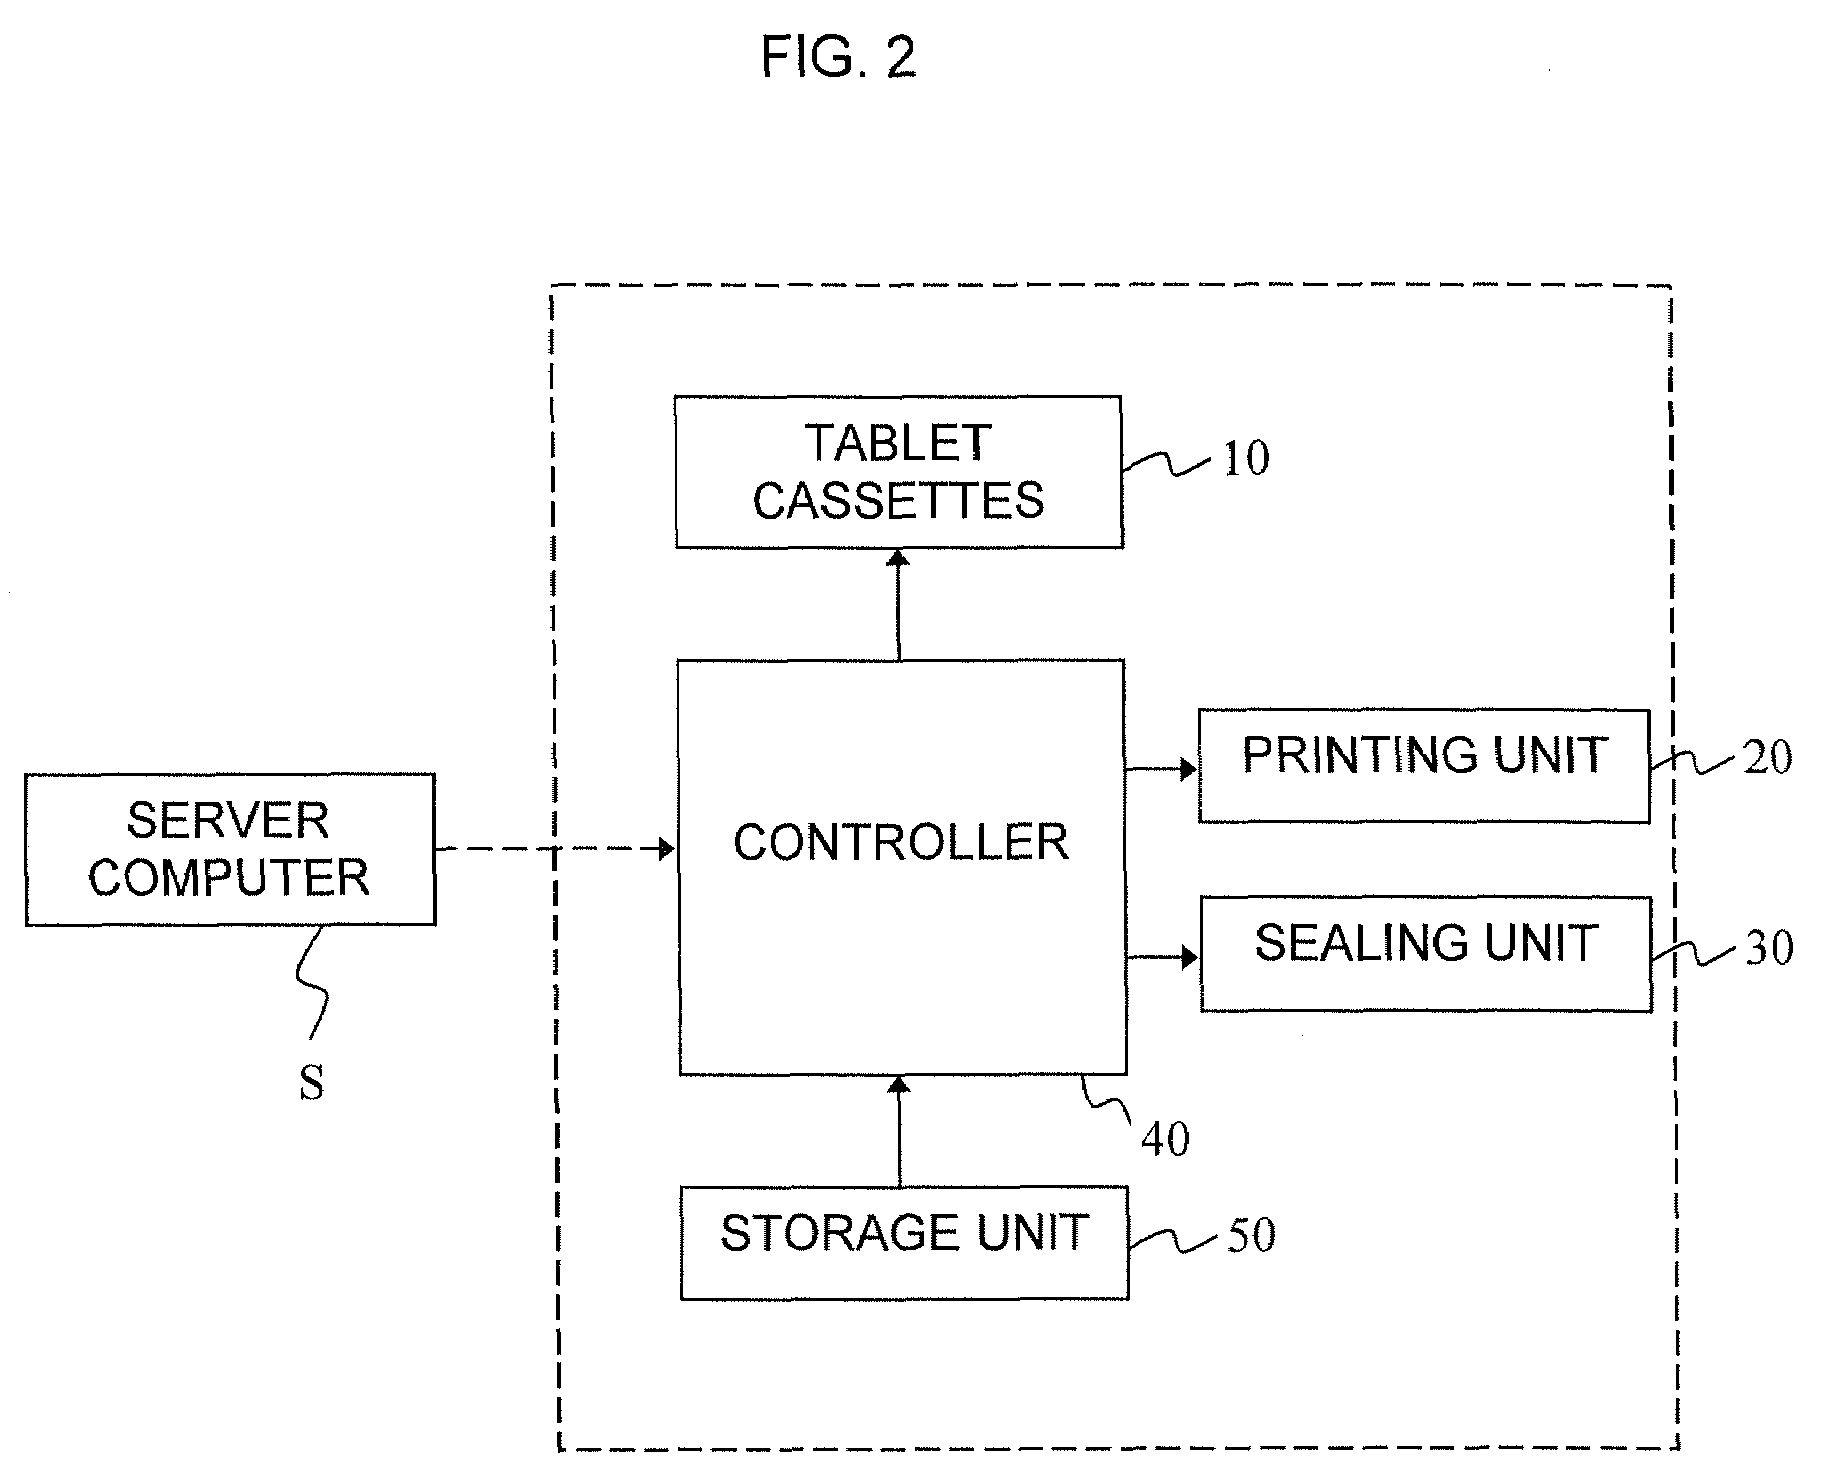 Division-packaging method and apparatus for automatic medicine packaging machine